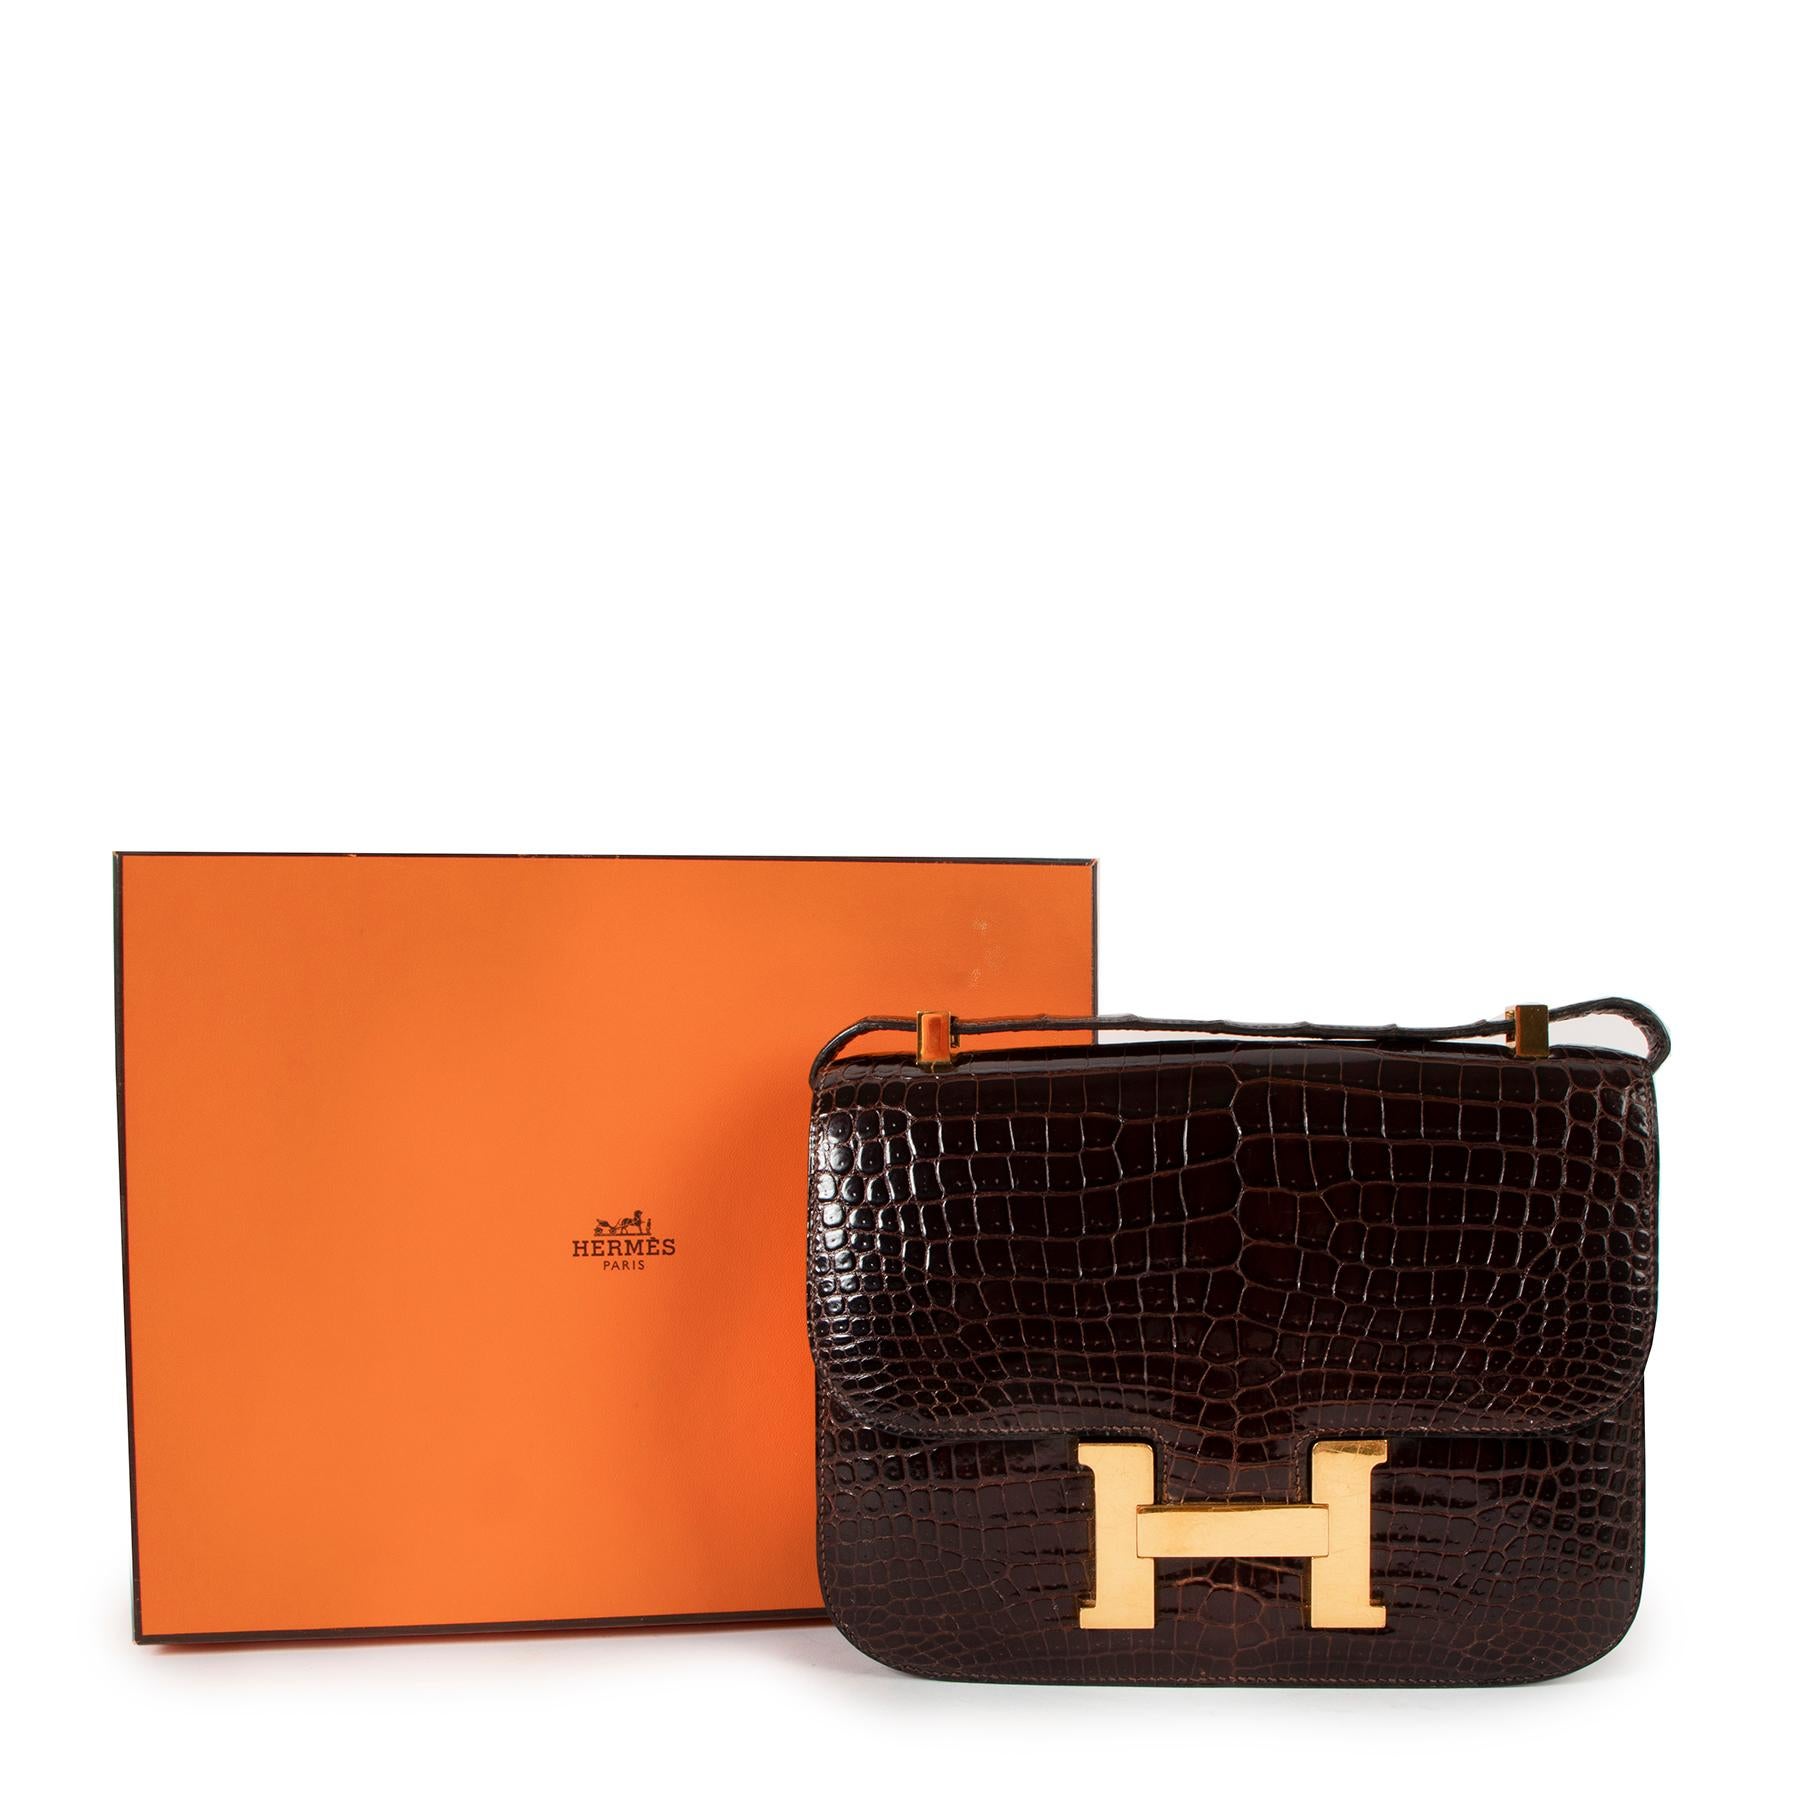 Hermès Vintage Constance 23 Brown Shiny Crocodile Porosus Gold Hardware

This Hermès Constance 23 in Crocodile Porosus is the epitome of luxury.

This vintage Constance is crafted from dark brown Crocodile Porosus skin. Known for its modern looking